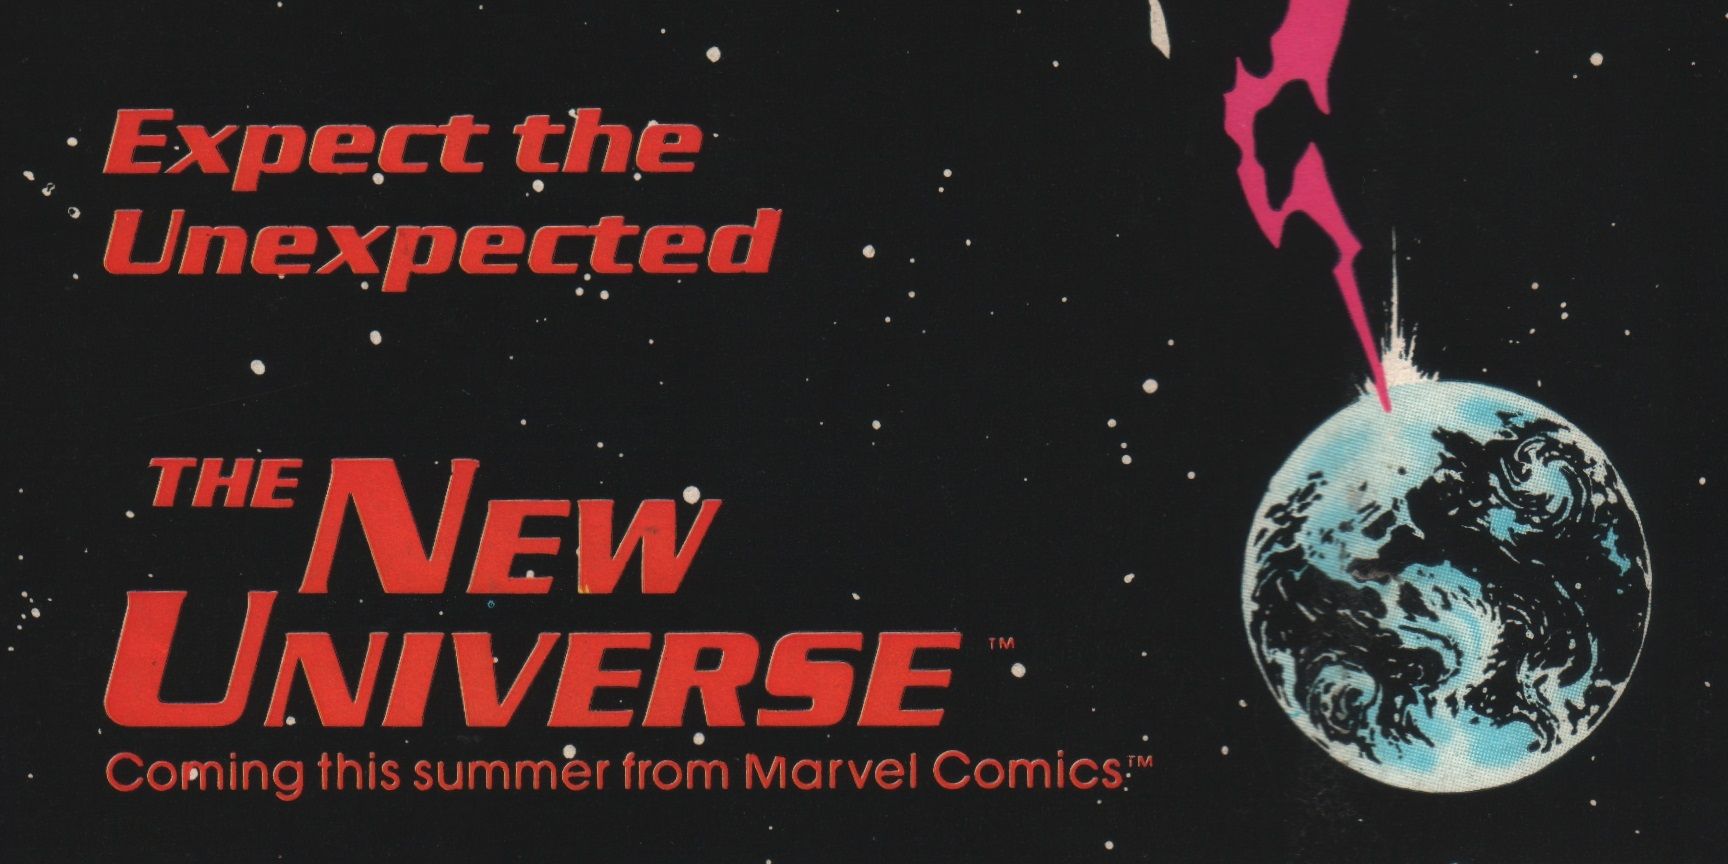 1986 ad for the New Universe